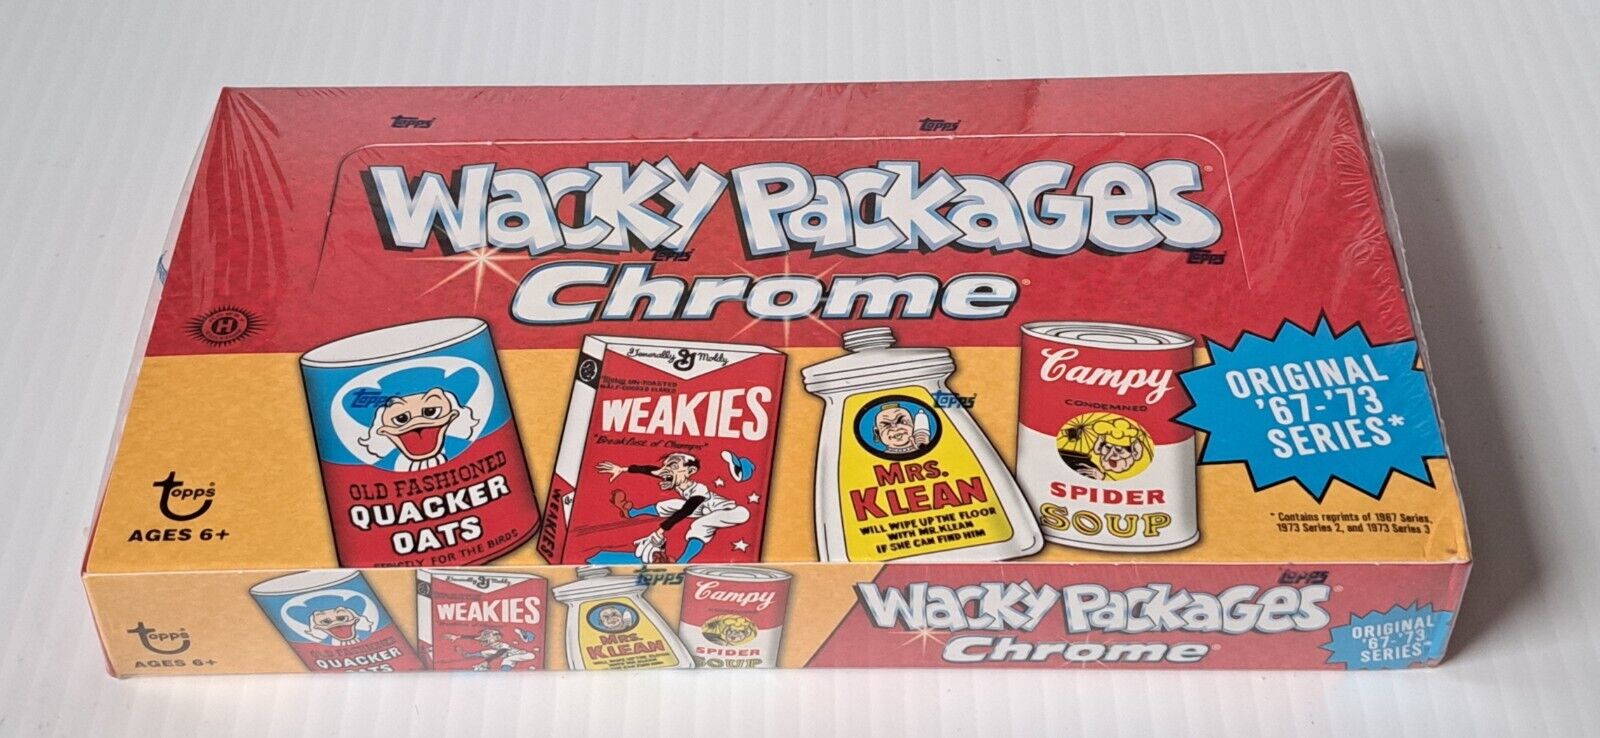 2014 TOPPS WACKY PACKAGES CHROME TRADING CARDS 24 PACK BOX SEALED NEW